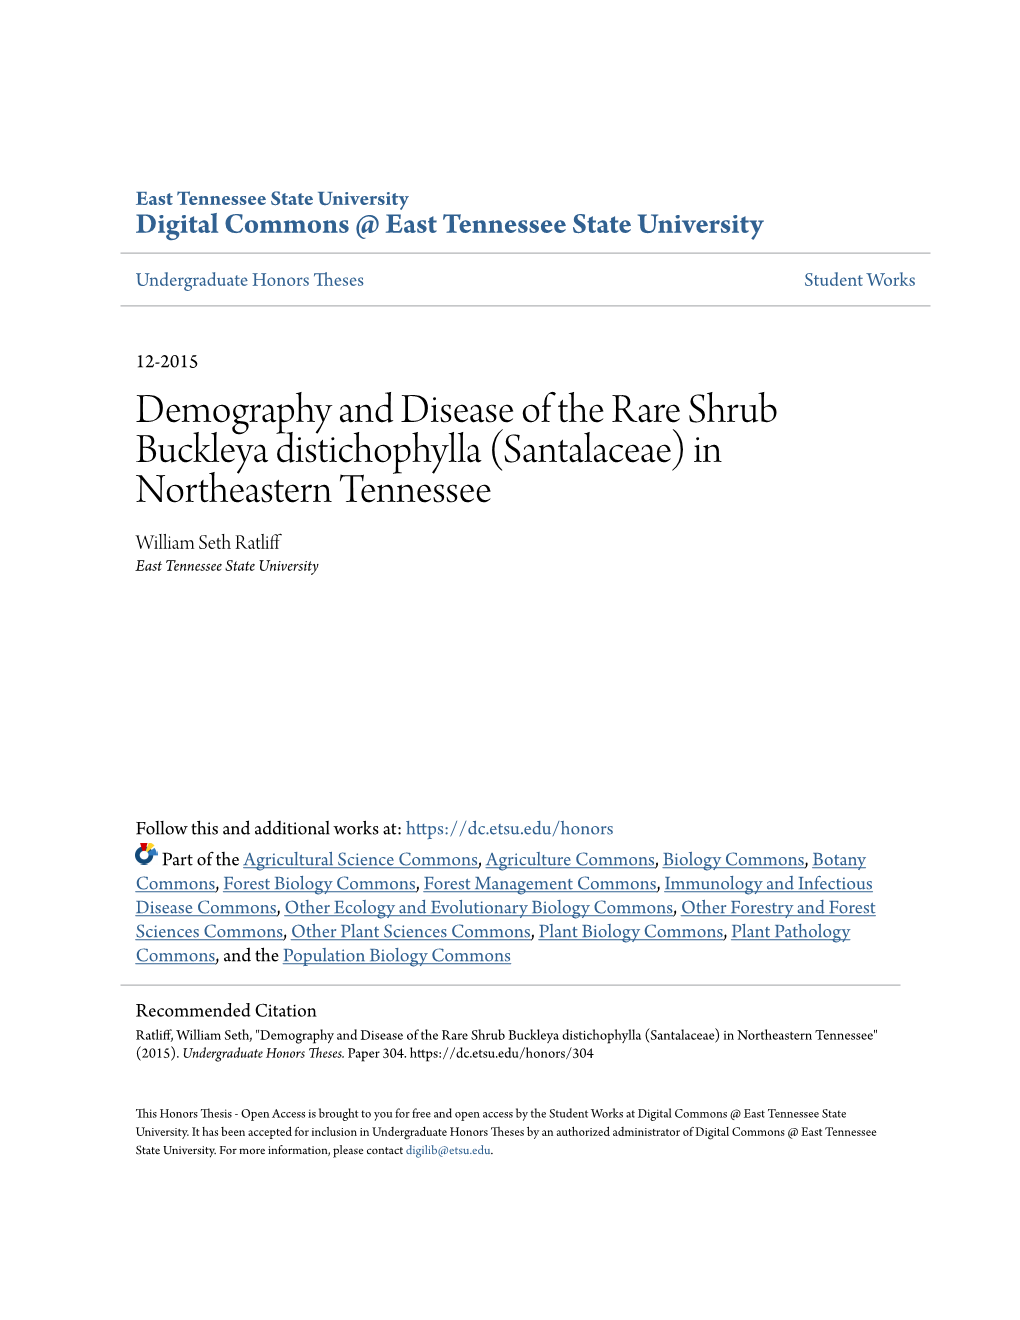 Demography and Disease of the Rare Shrub Buckleya Distichophylla (Santalaceae) in Northeastern Tennessee William Seth Ratliff East Tennessee State University